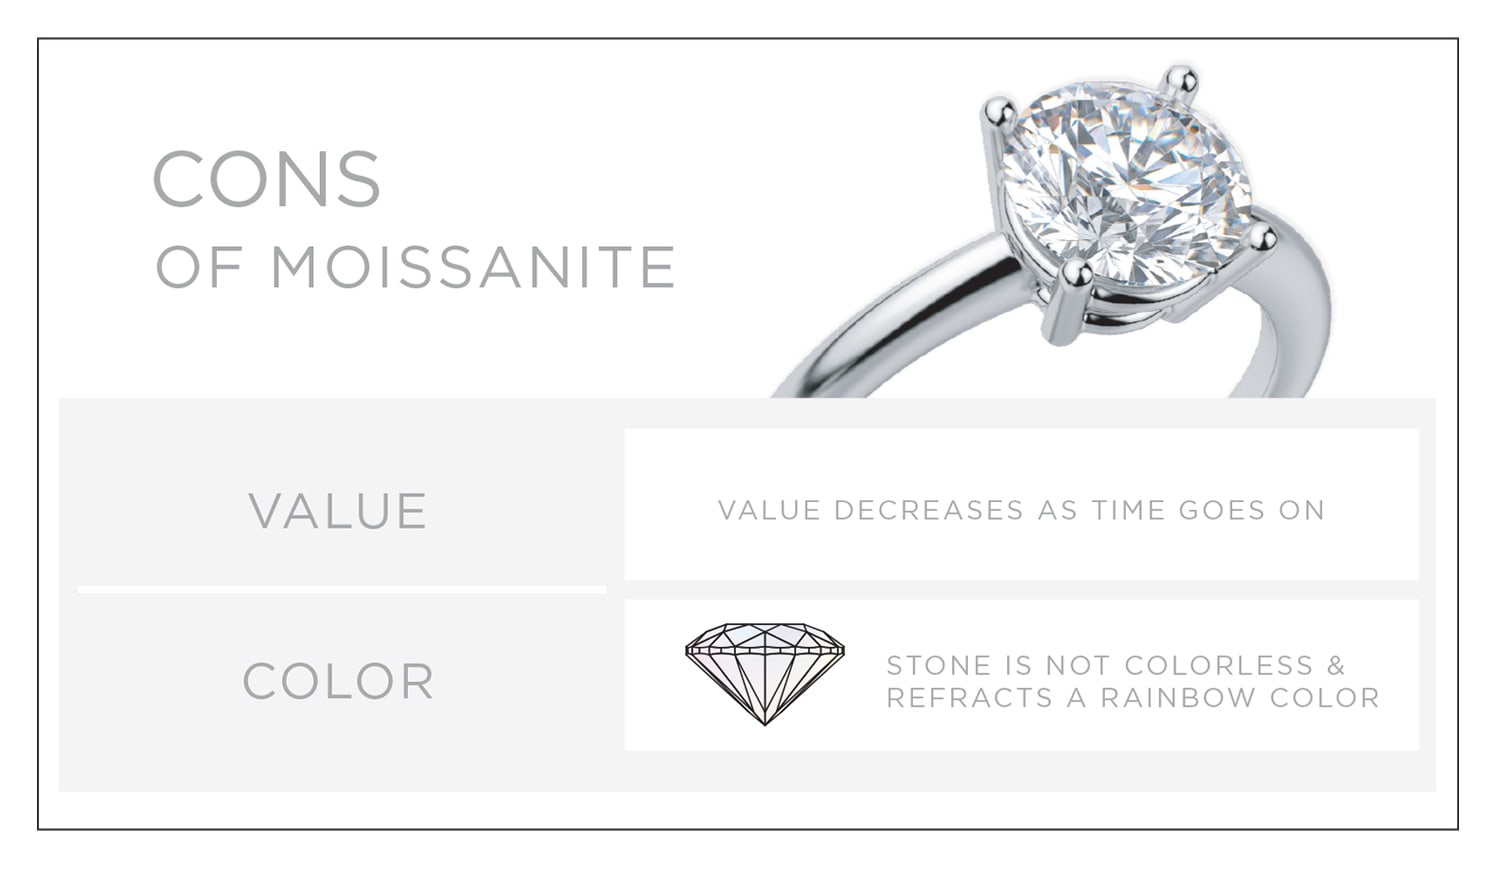 The cons of moissanite